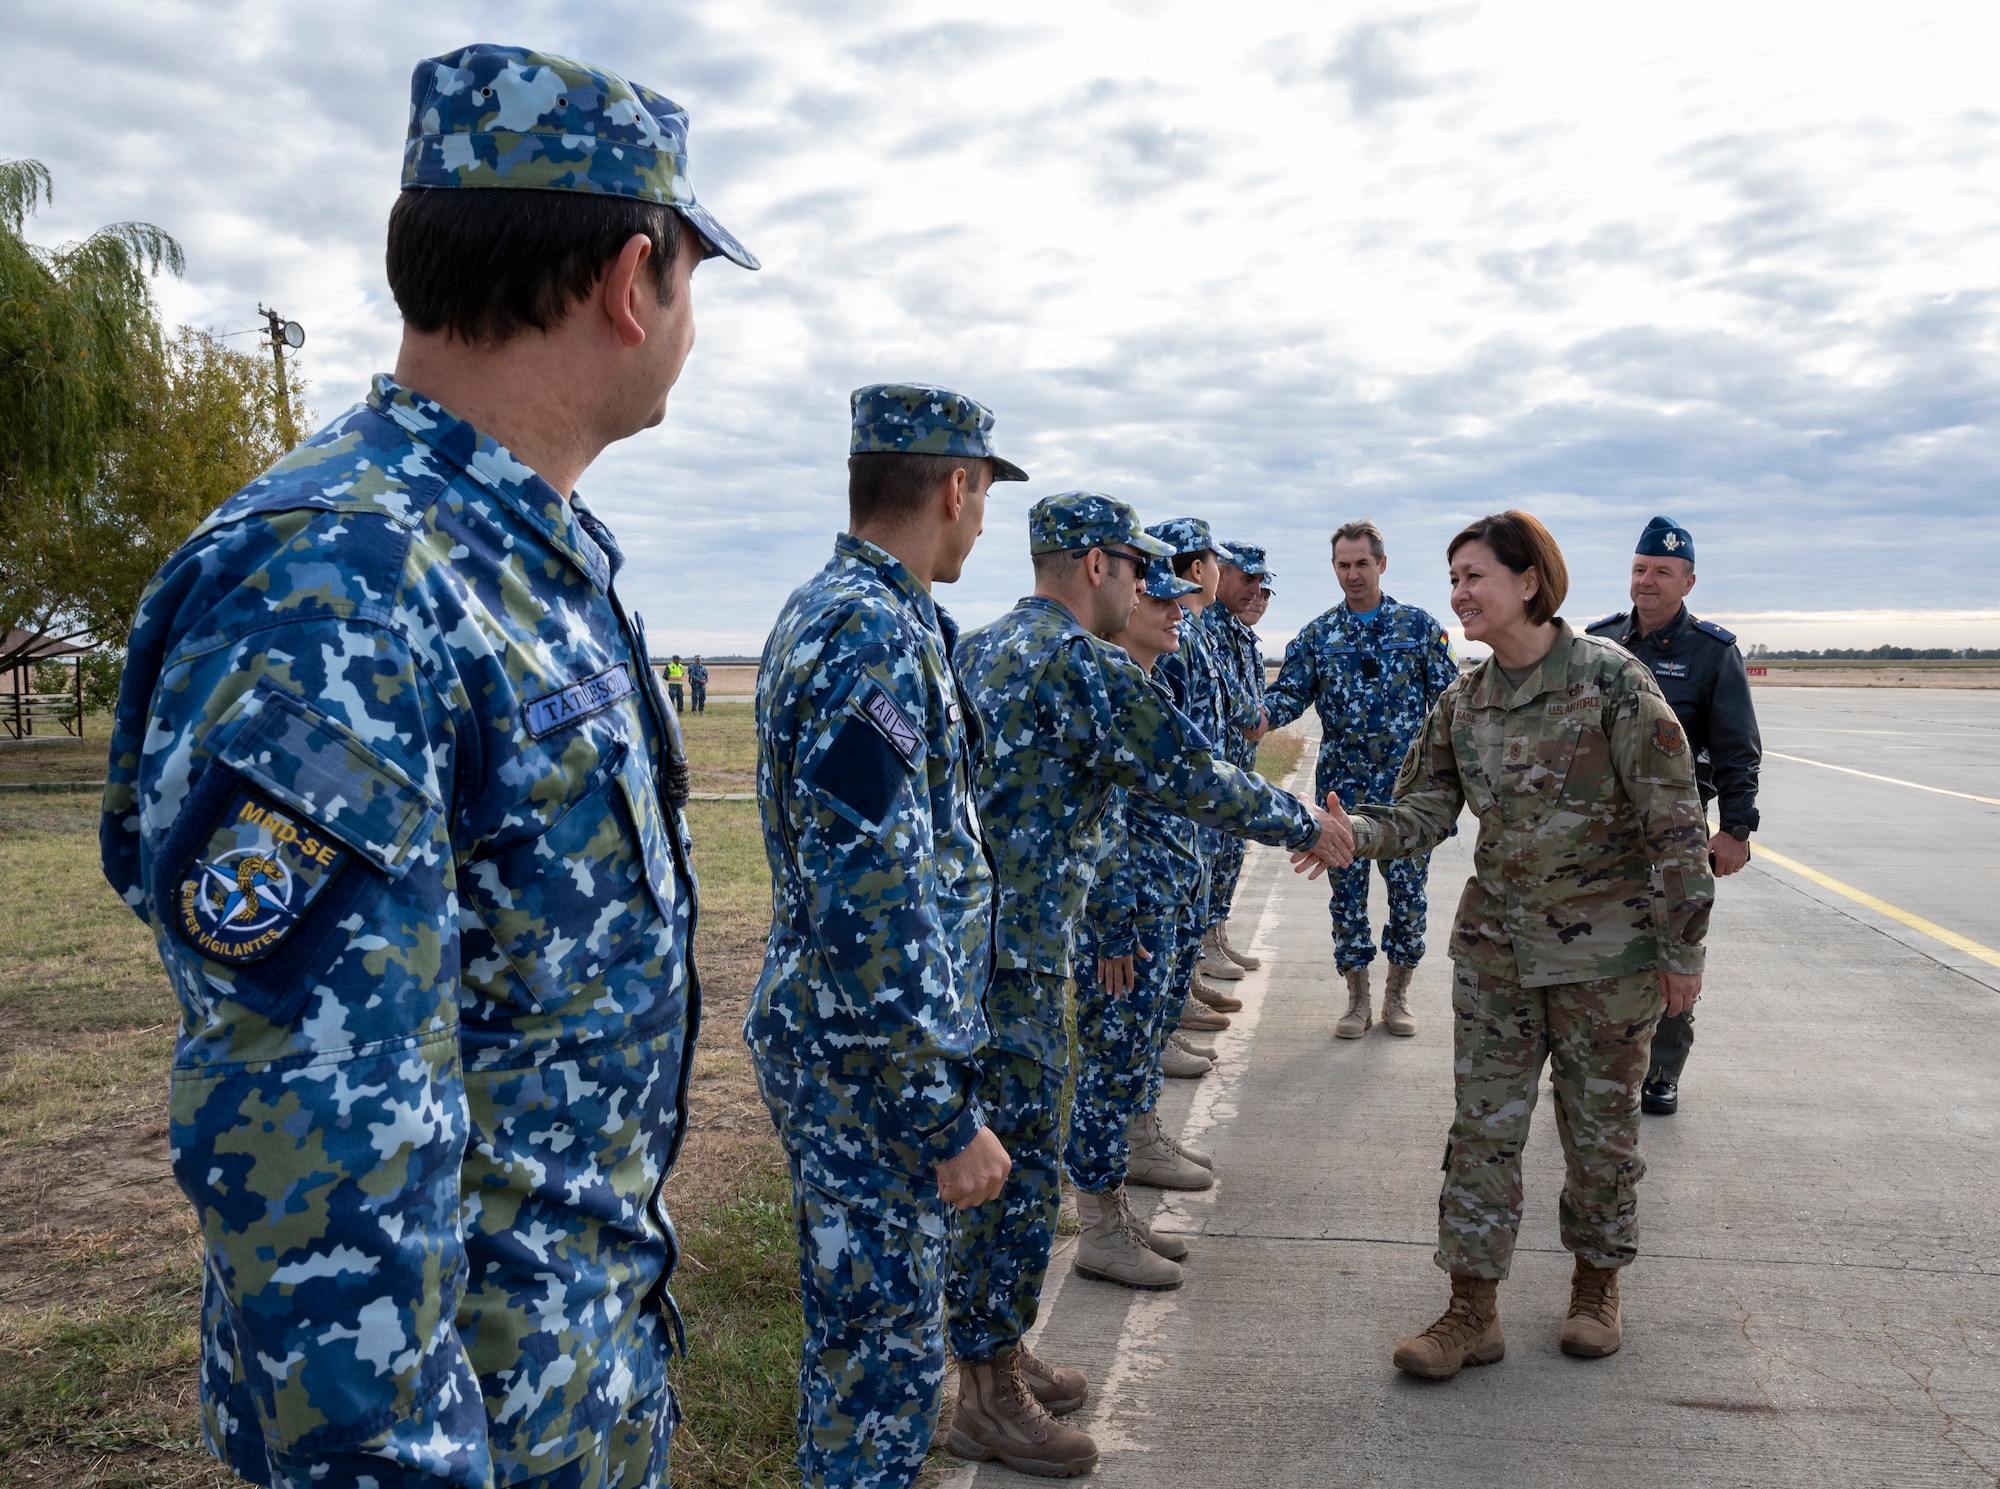 CMSAF shaking hands with members of the Romanian Air Force